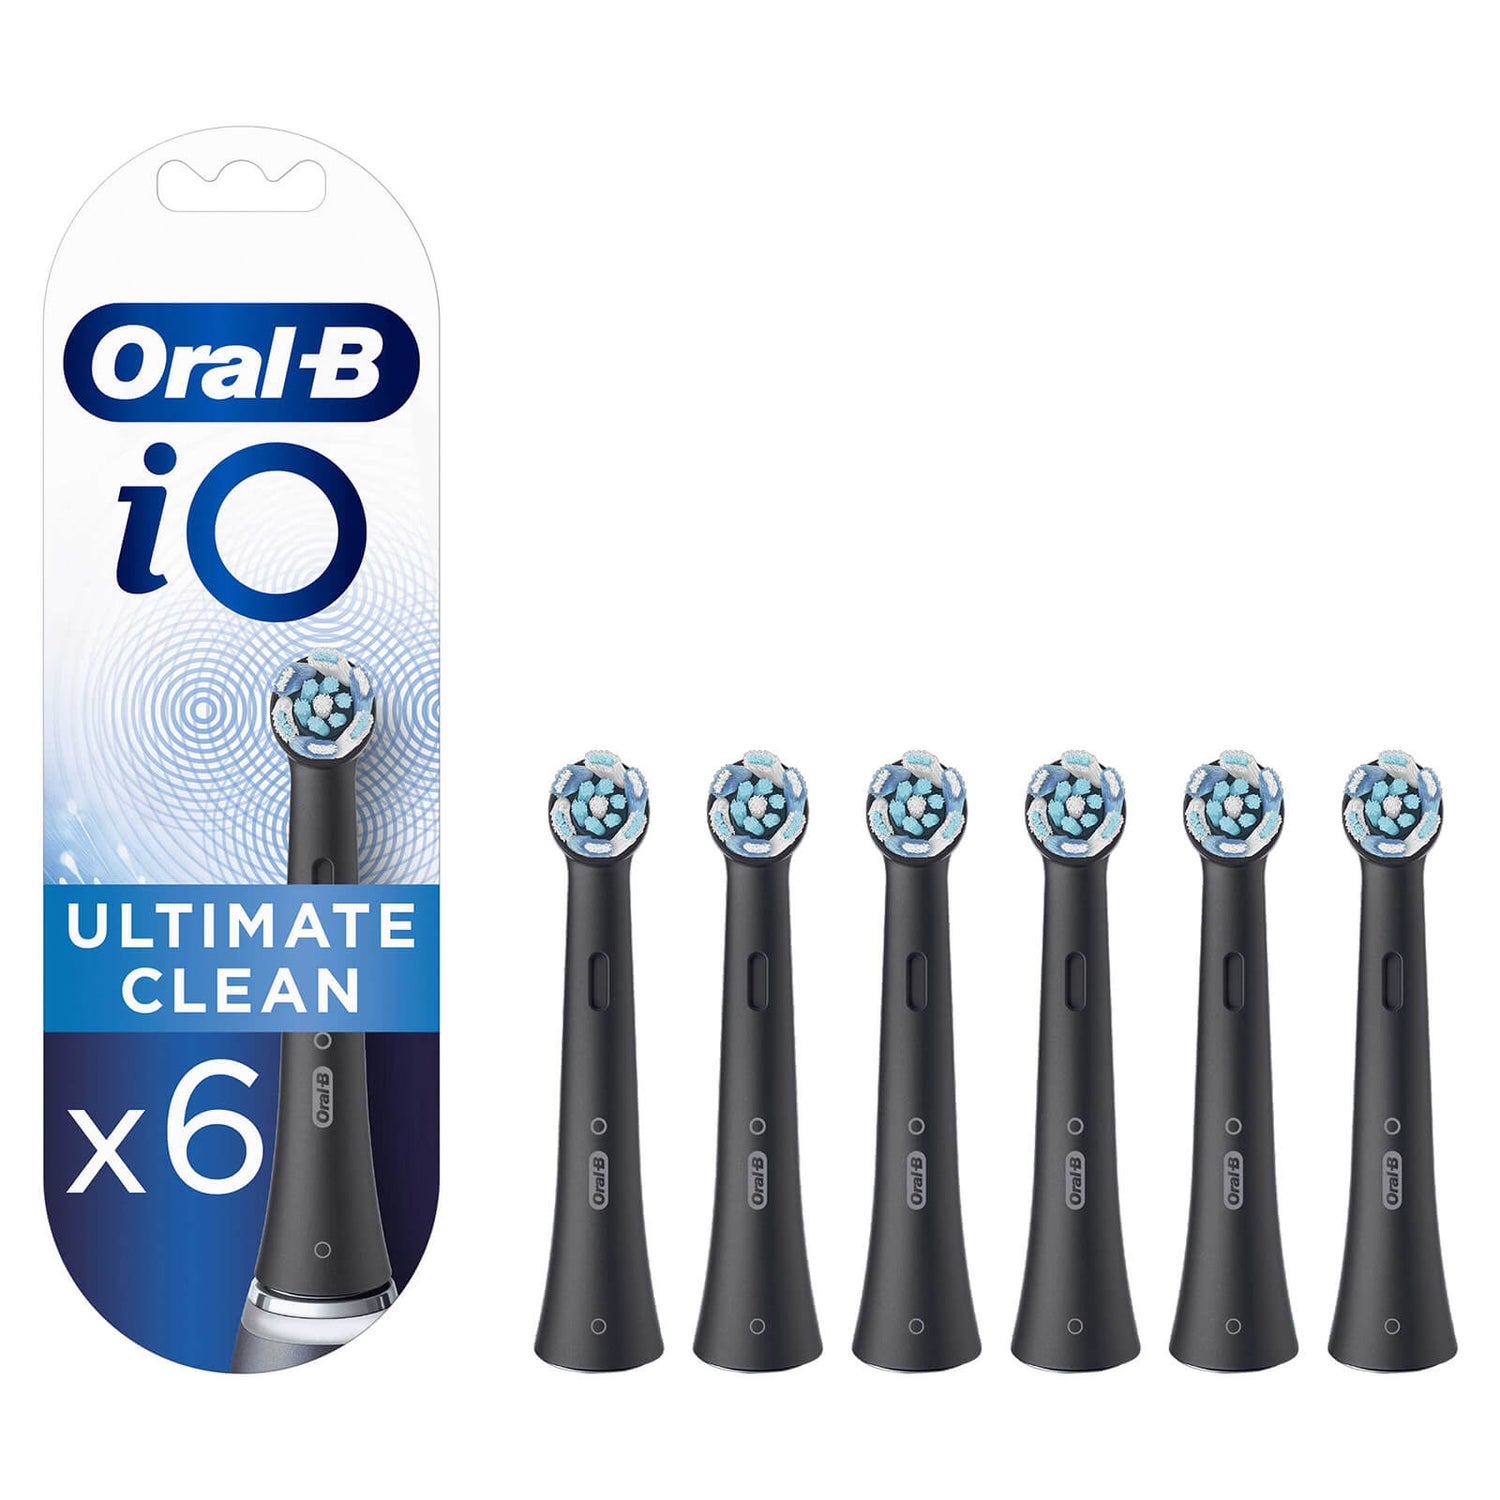 Oral-B iO Ultimate Clean Black Brush Heads, 6 Pieces